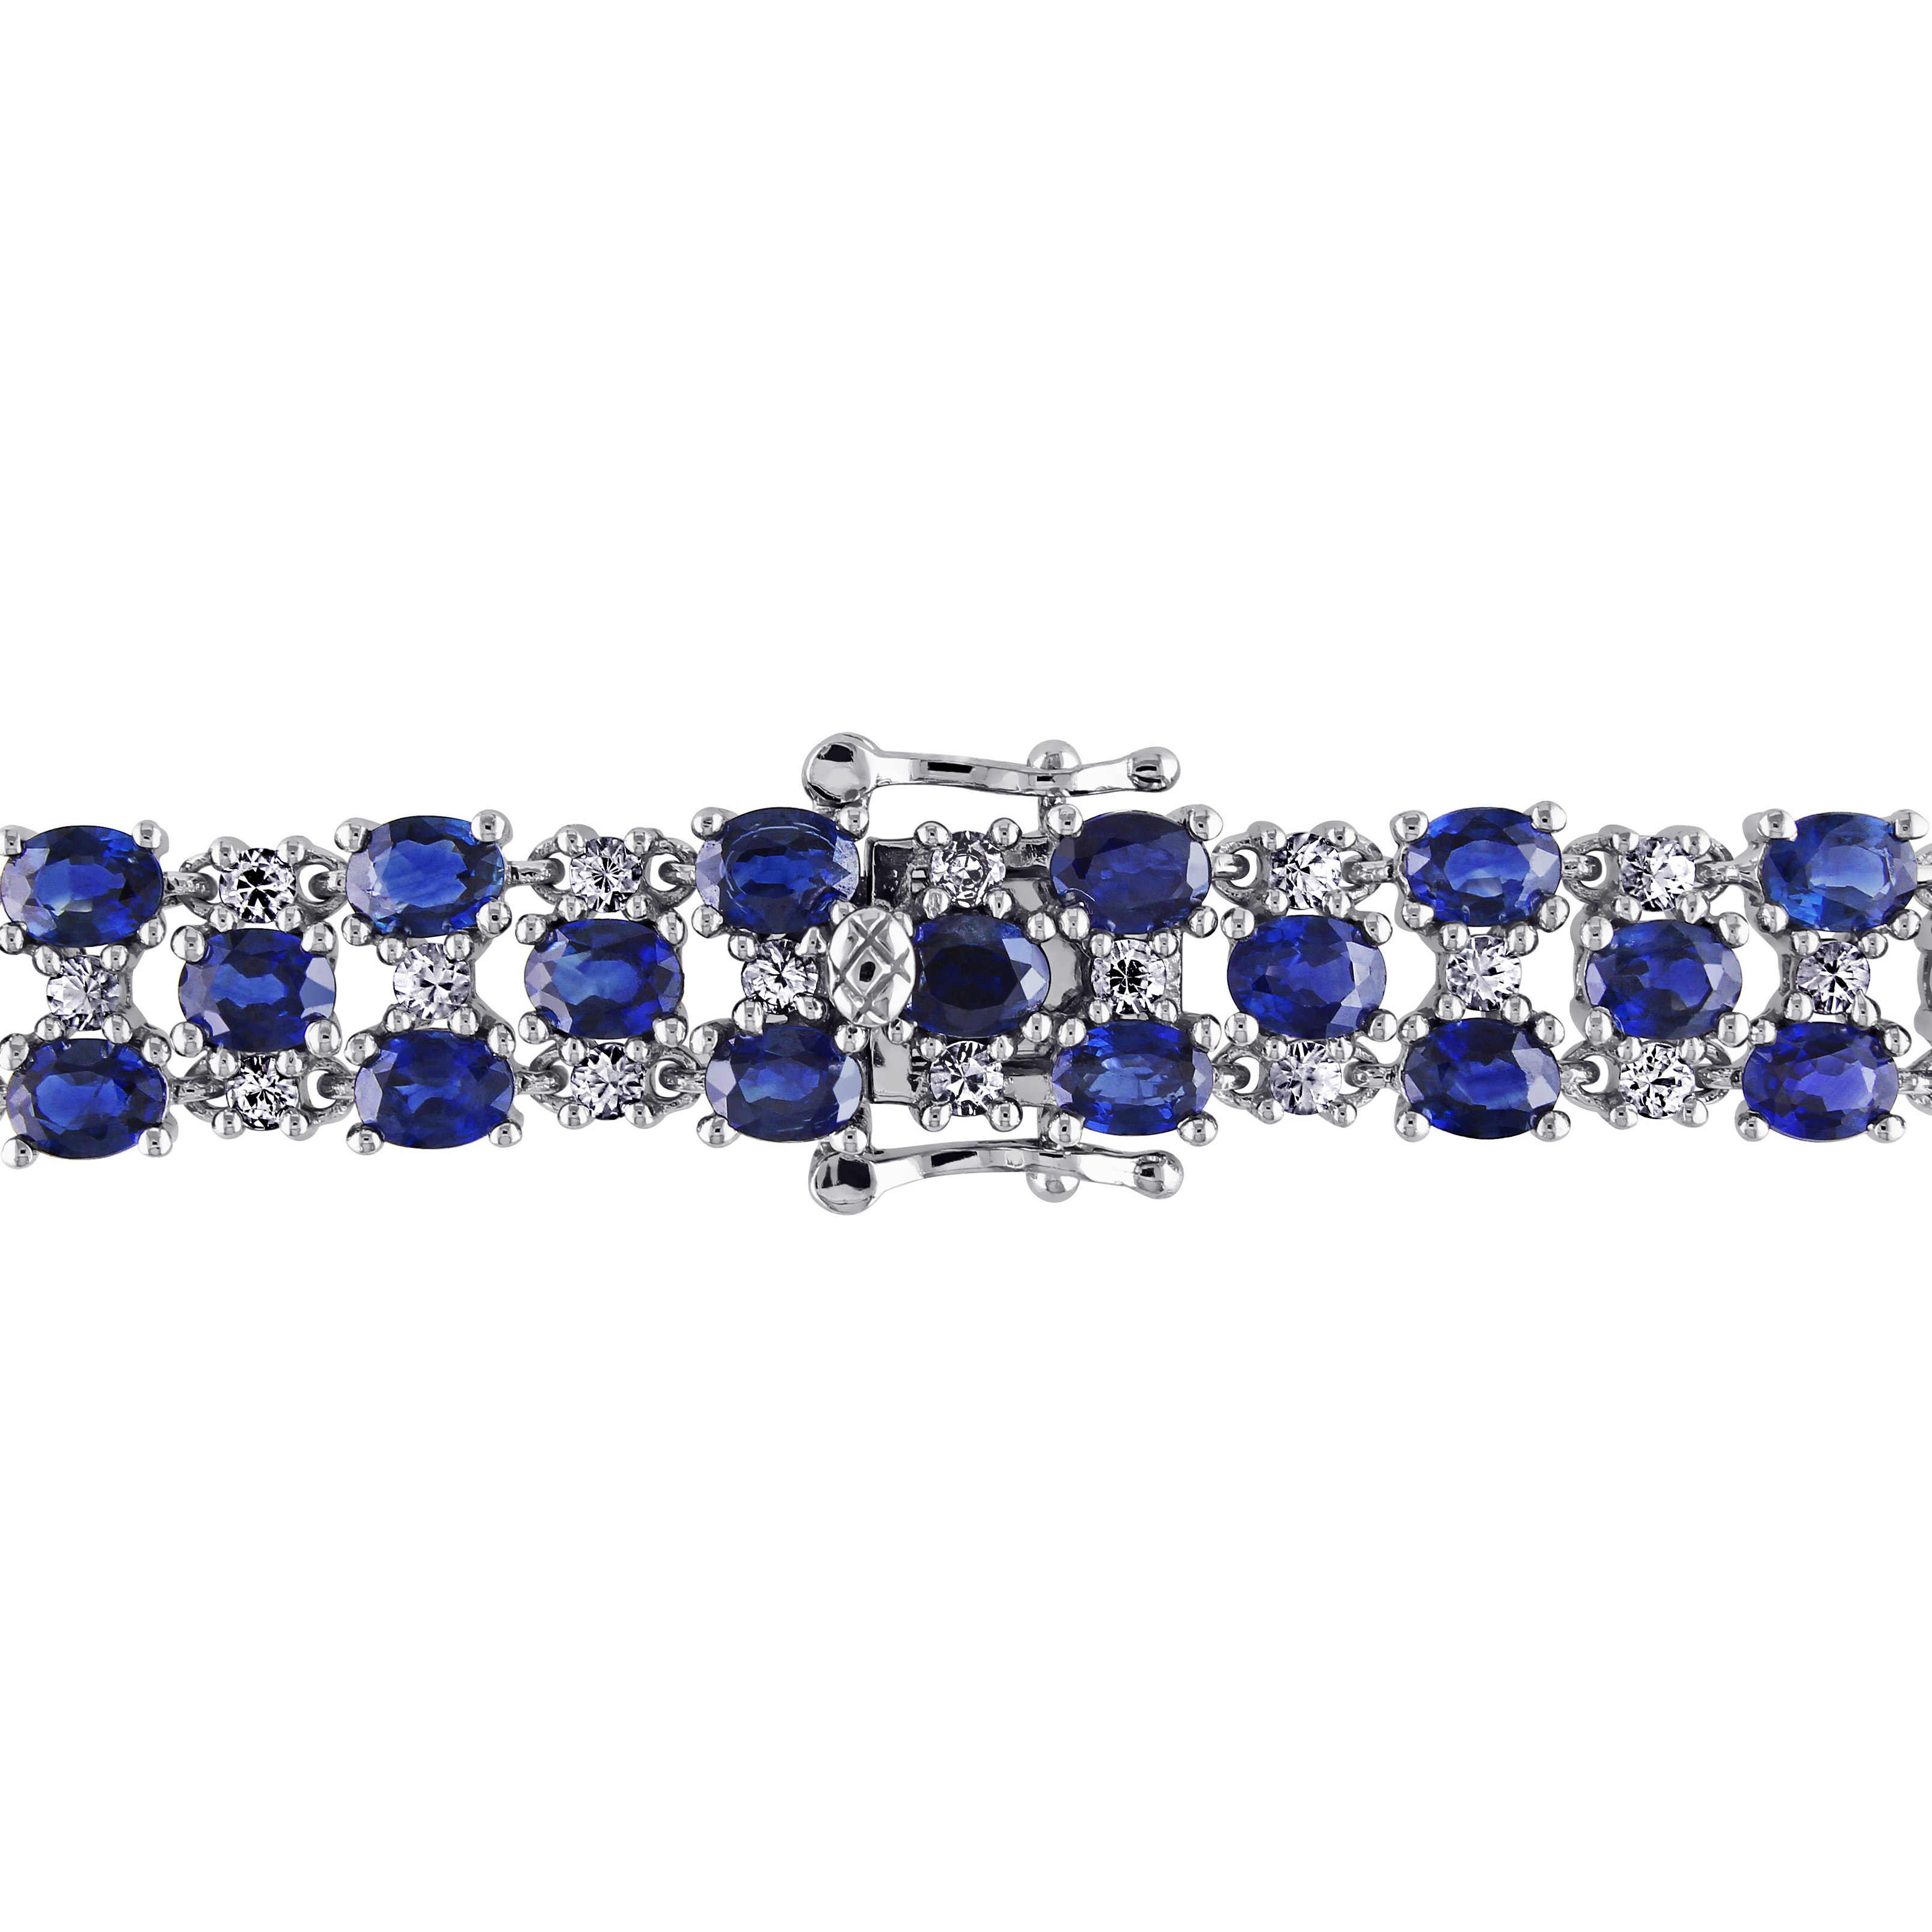 15 3/4 CT TGW Blue and White Sapphire Bracelet in 14K White Gold